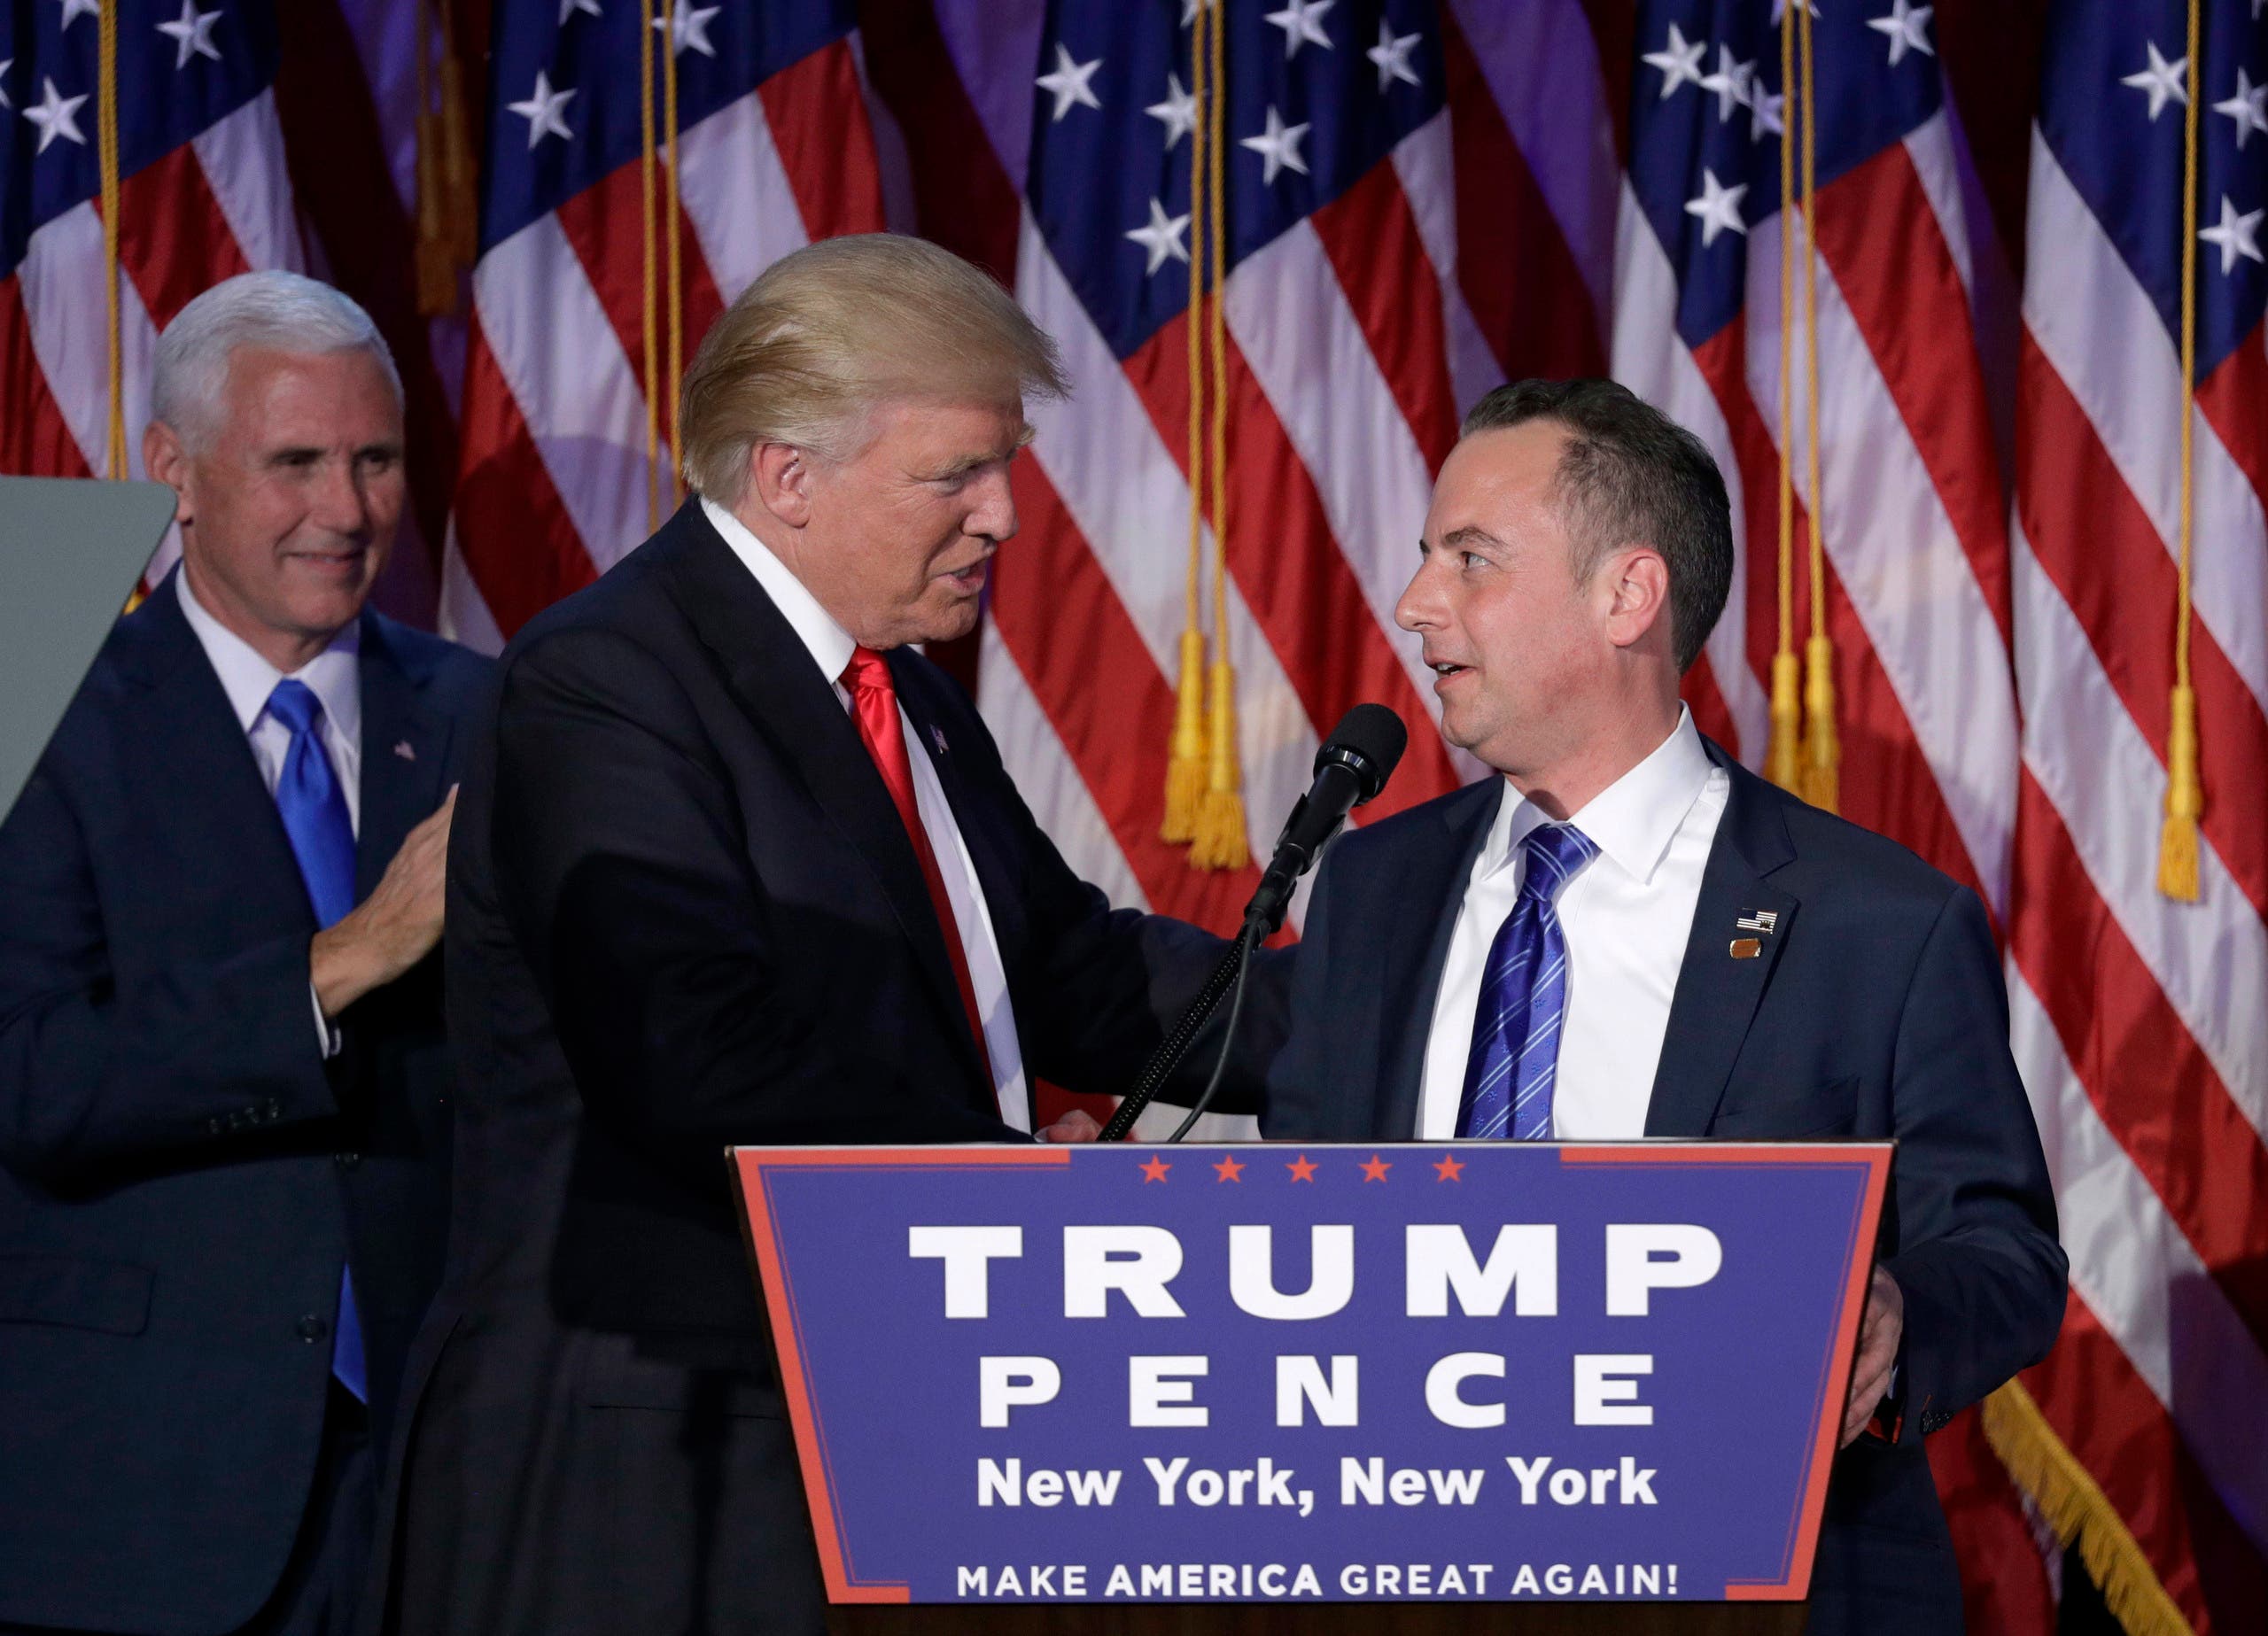 In this Wednesday, Nov. 9, 2016, file photo, President-elect Donald Trump, center, shakes hands with Republican National Committee Chairman Reince Priebus during an election night rally in New York. Trump on Sunday named Priebus as his White House chief of staff. (AP)